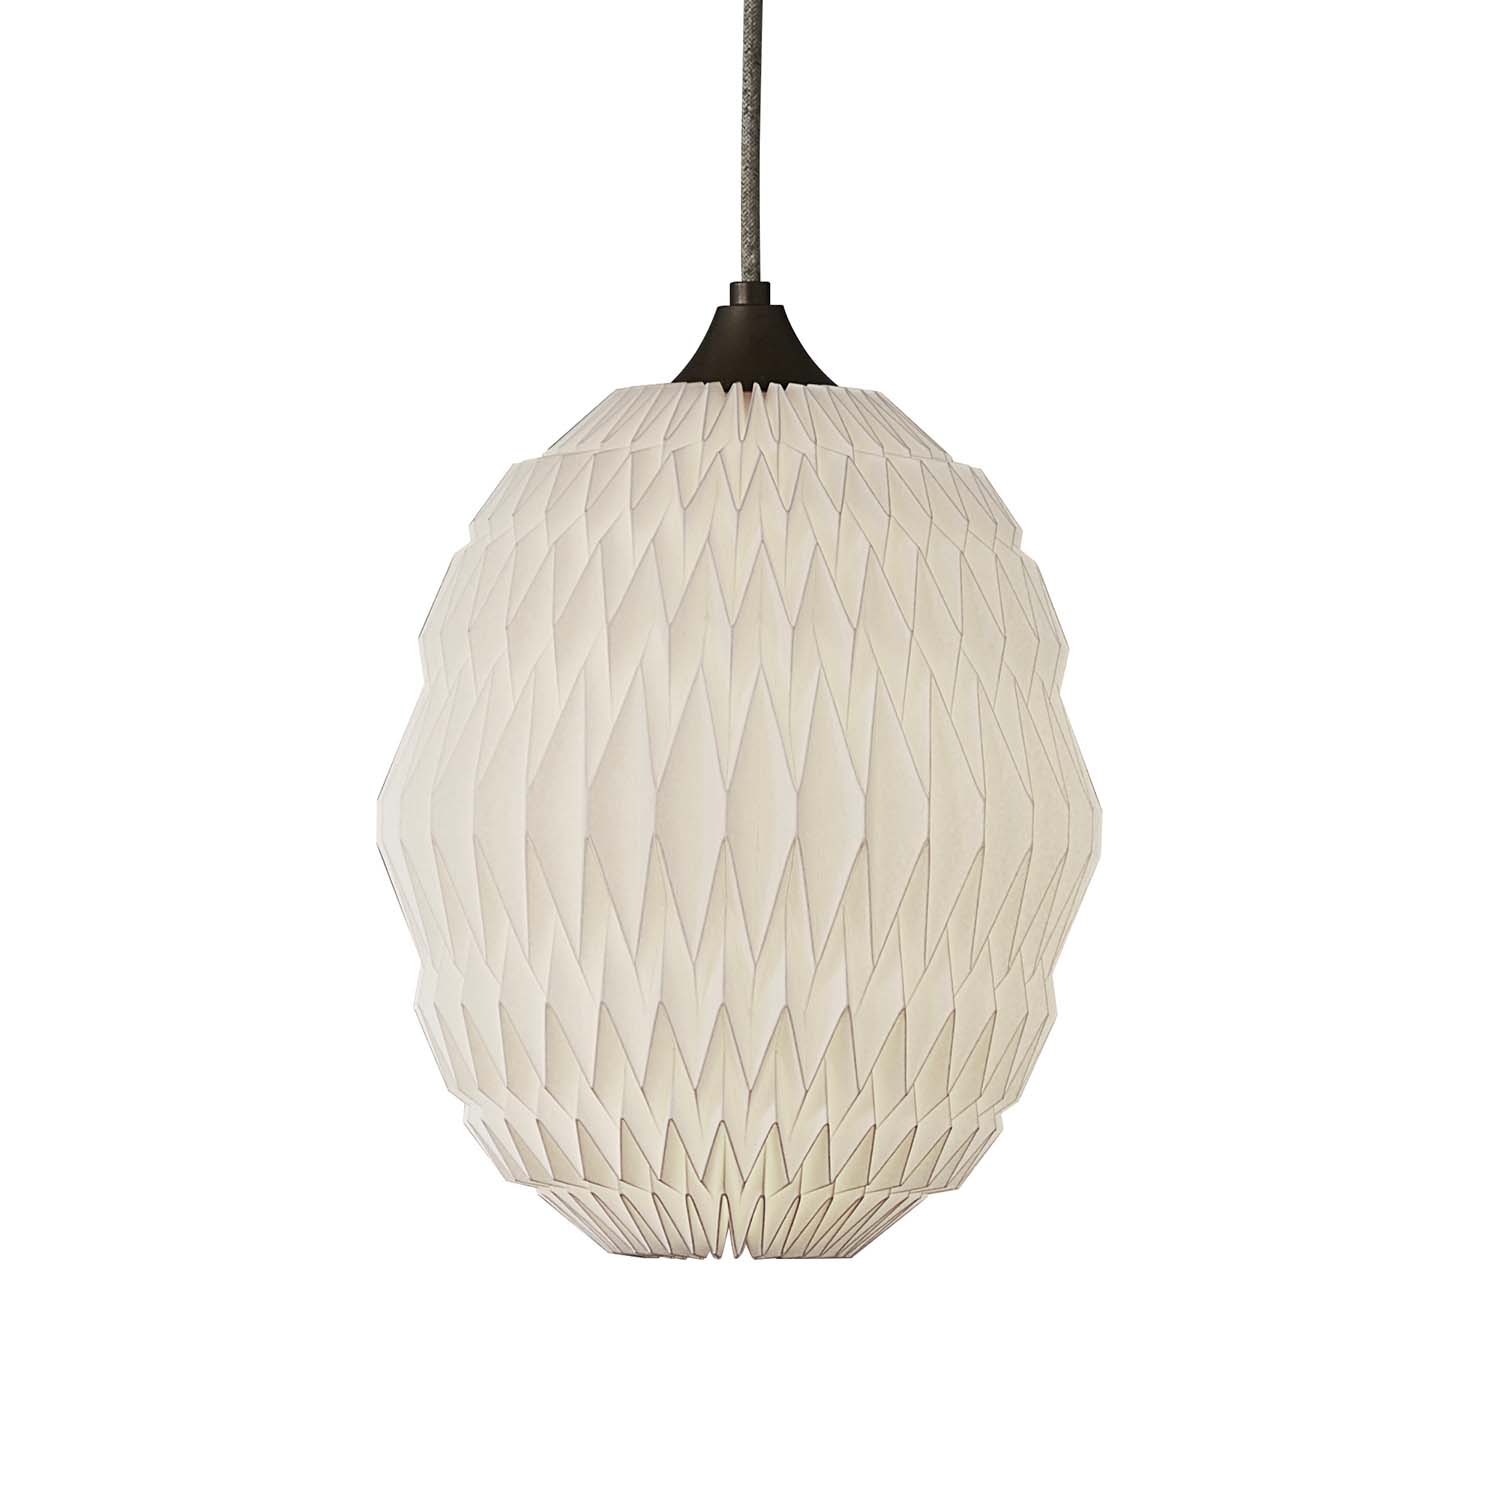 CALEO 1 - Handcrafted pleated paper pendant